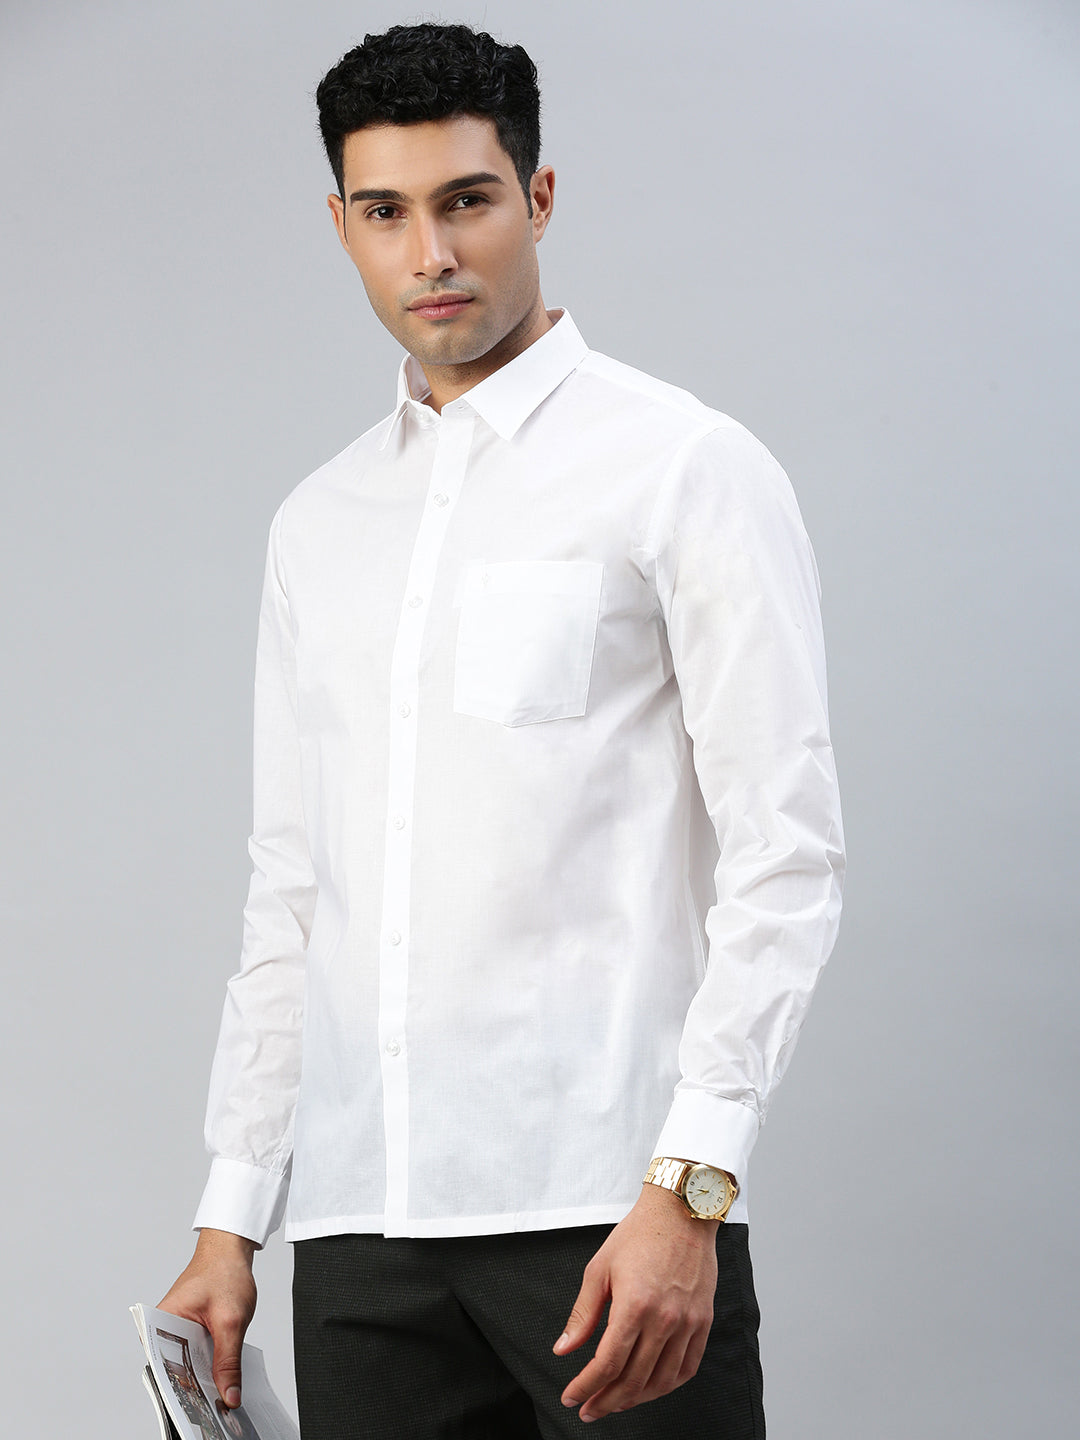 Mens 100% Cotton Royal Look White Shirt - Justice White